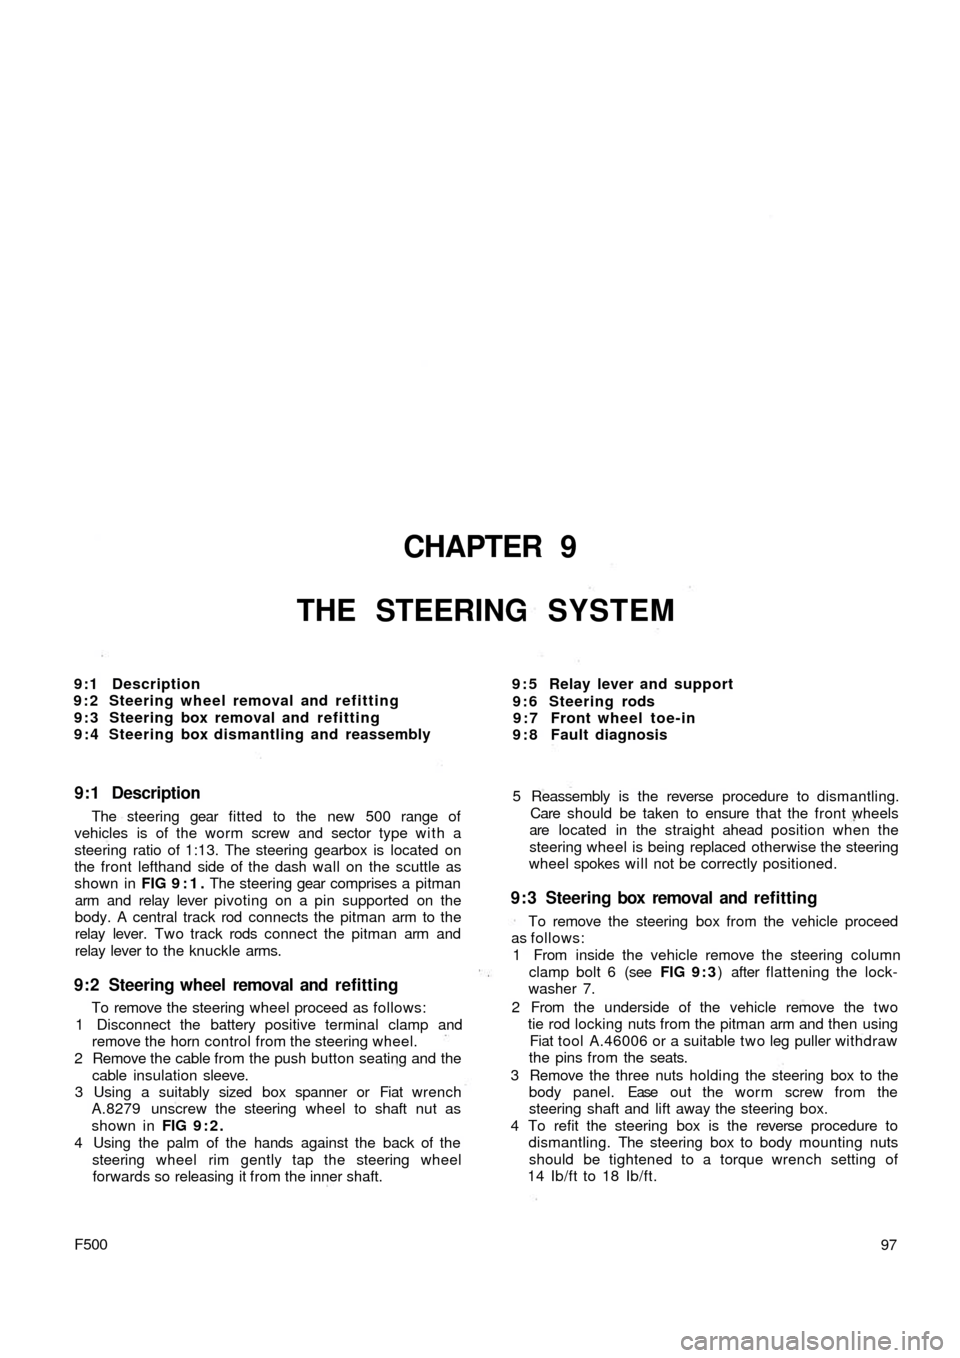 FIAT 500 1967 1.G Workshop Manual CHAPTER 9
THE STEERING SYSTEM
9 : 5 Relay lever and support
9 : 6 Steering rods
9 : 7 Front wheel toe-in
9 : 8 Fault diagnosis 9:1 Description
9 : 2 Steering wheel removal and refitting
9 : 3 Steering